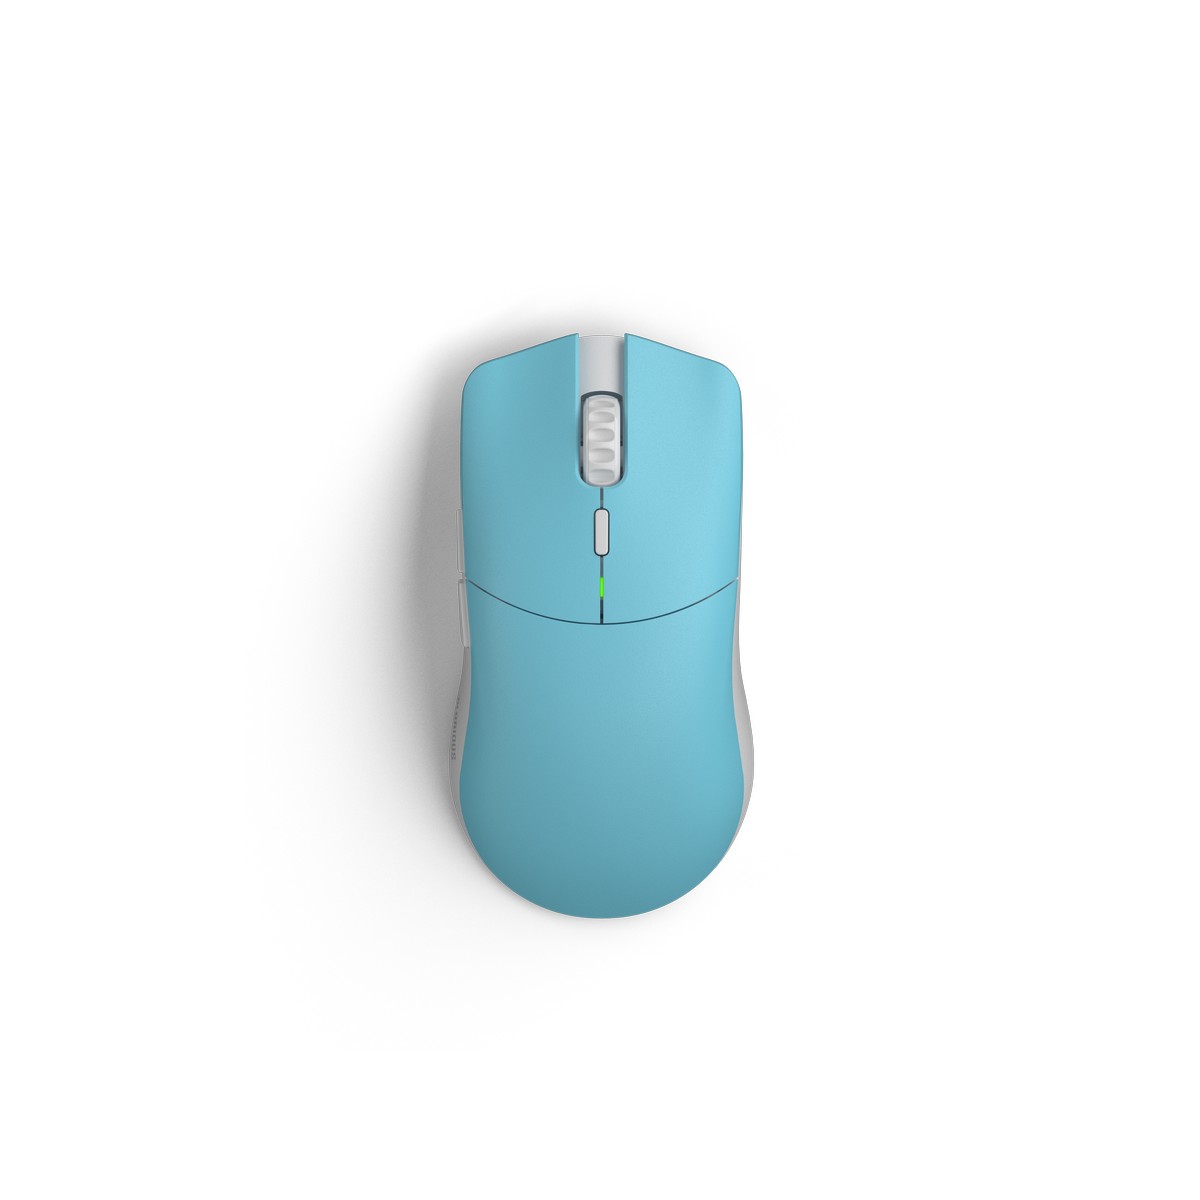 Glorious - Glorious Model O PRO Wireless Optical Gaming Mouse - Blue Lynx (GLO-MS-OW-BL-FORGE)